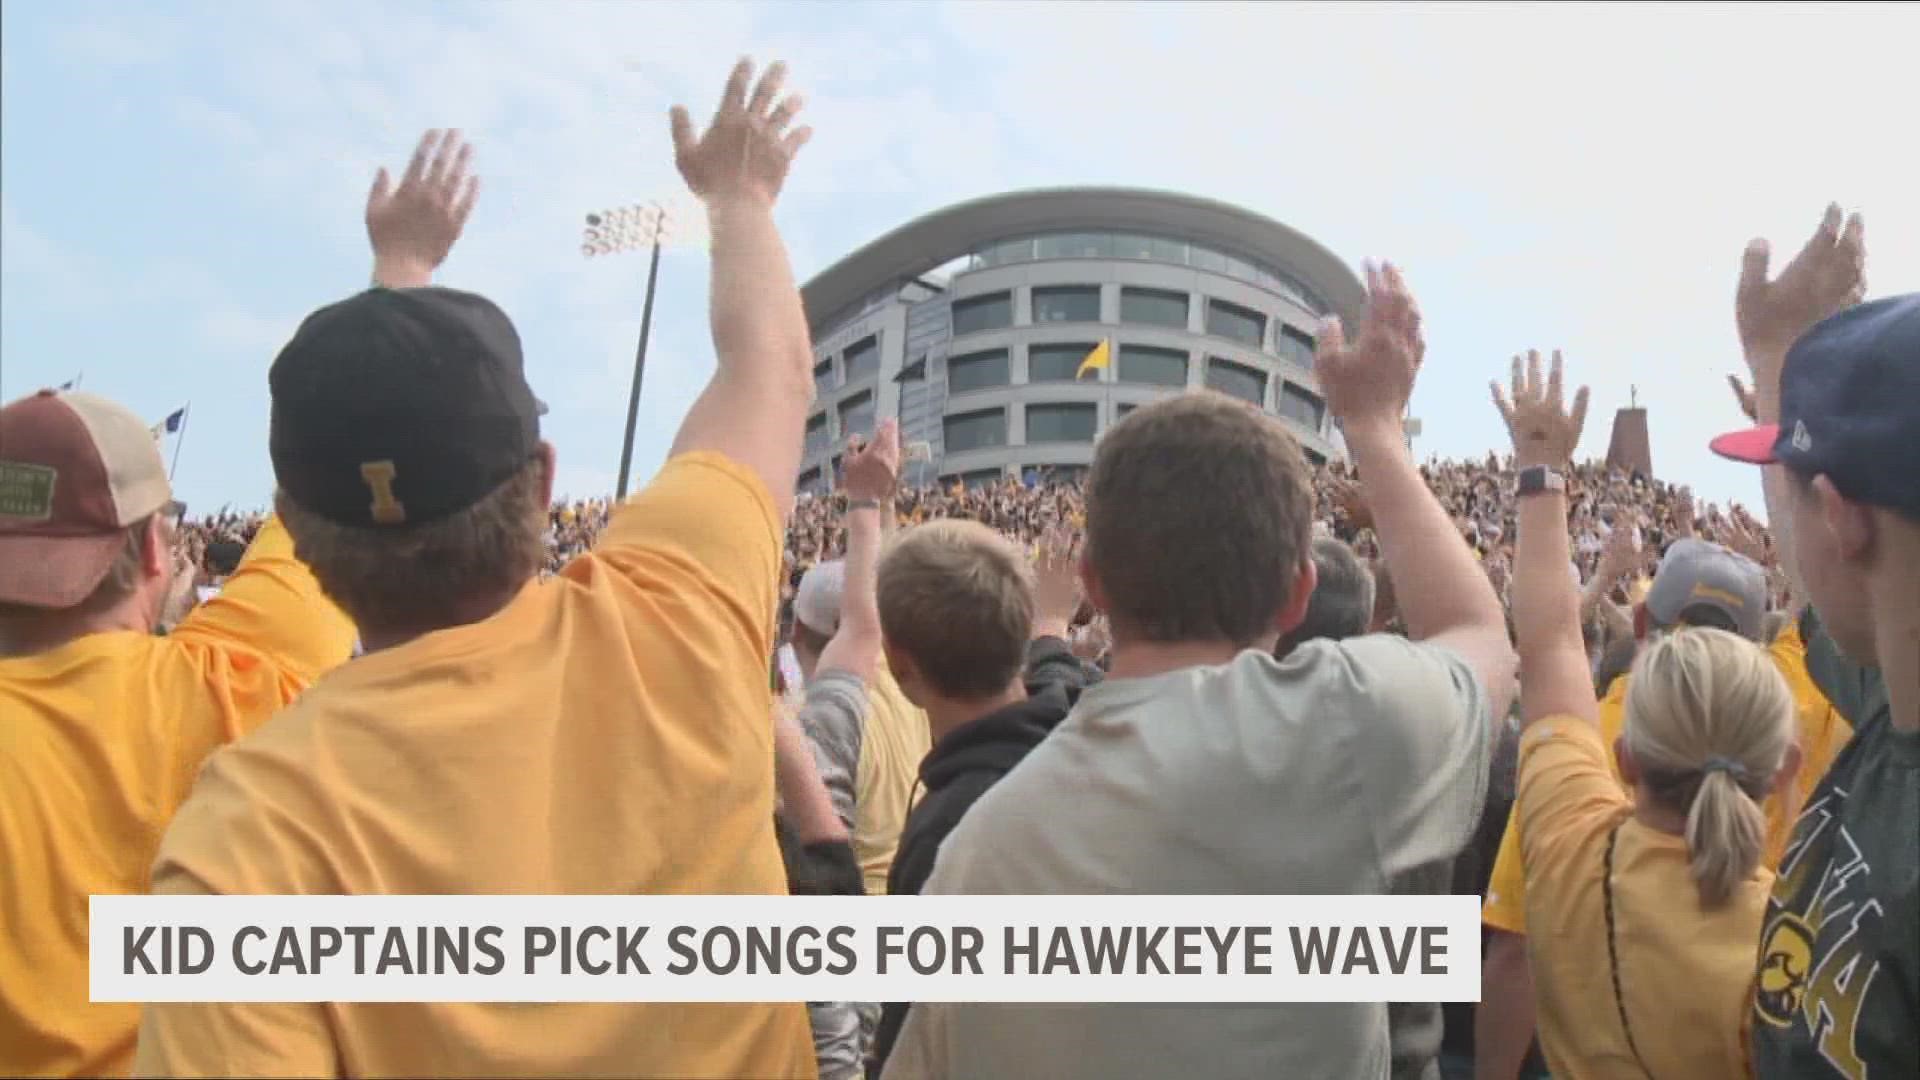 Each week, Kid Captains with the Stead Family Children's Hospital will choose a new song to accompany the Hawkeye Wave.